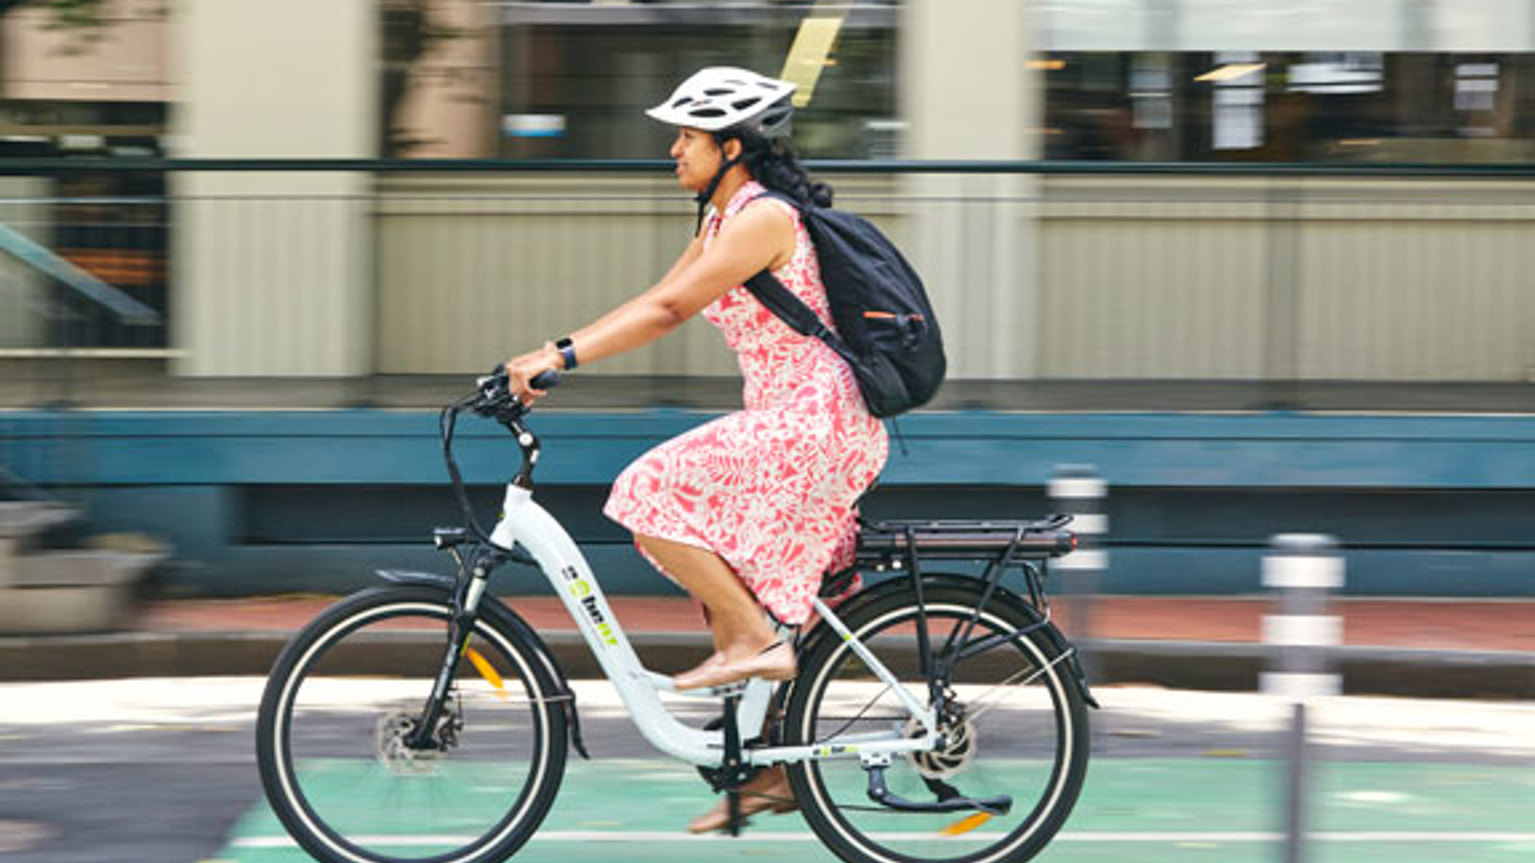 A woman in a pink floral dress rides an e-bike along a city street, the background is a blur.